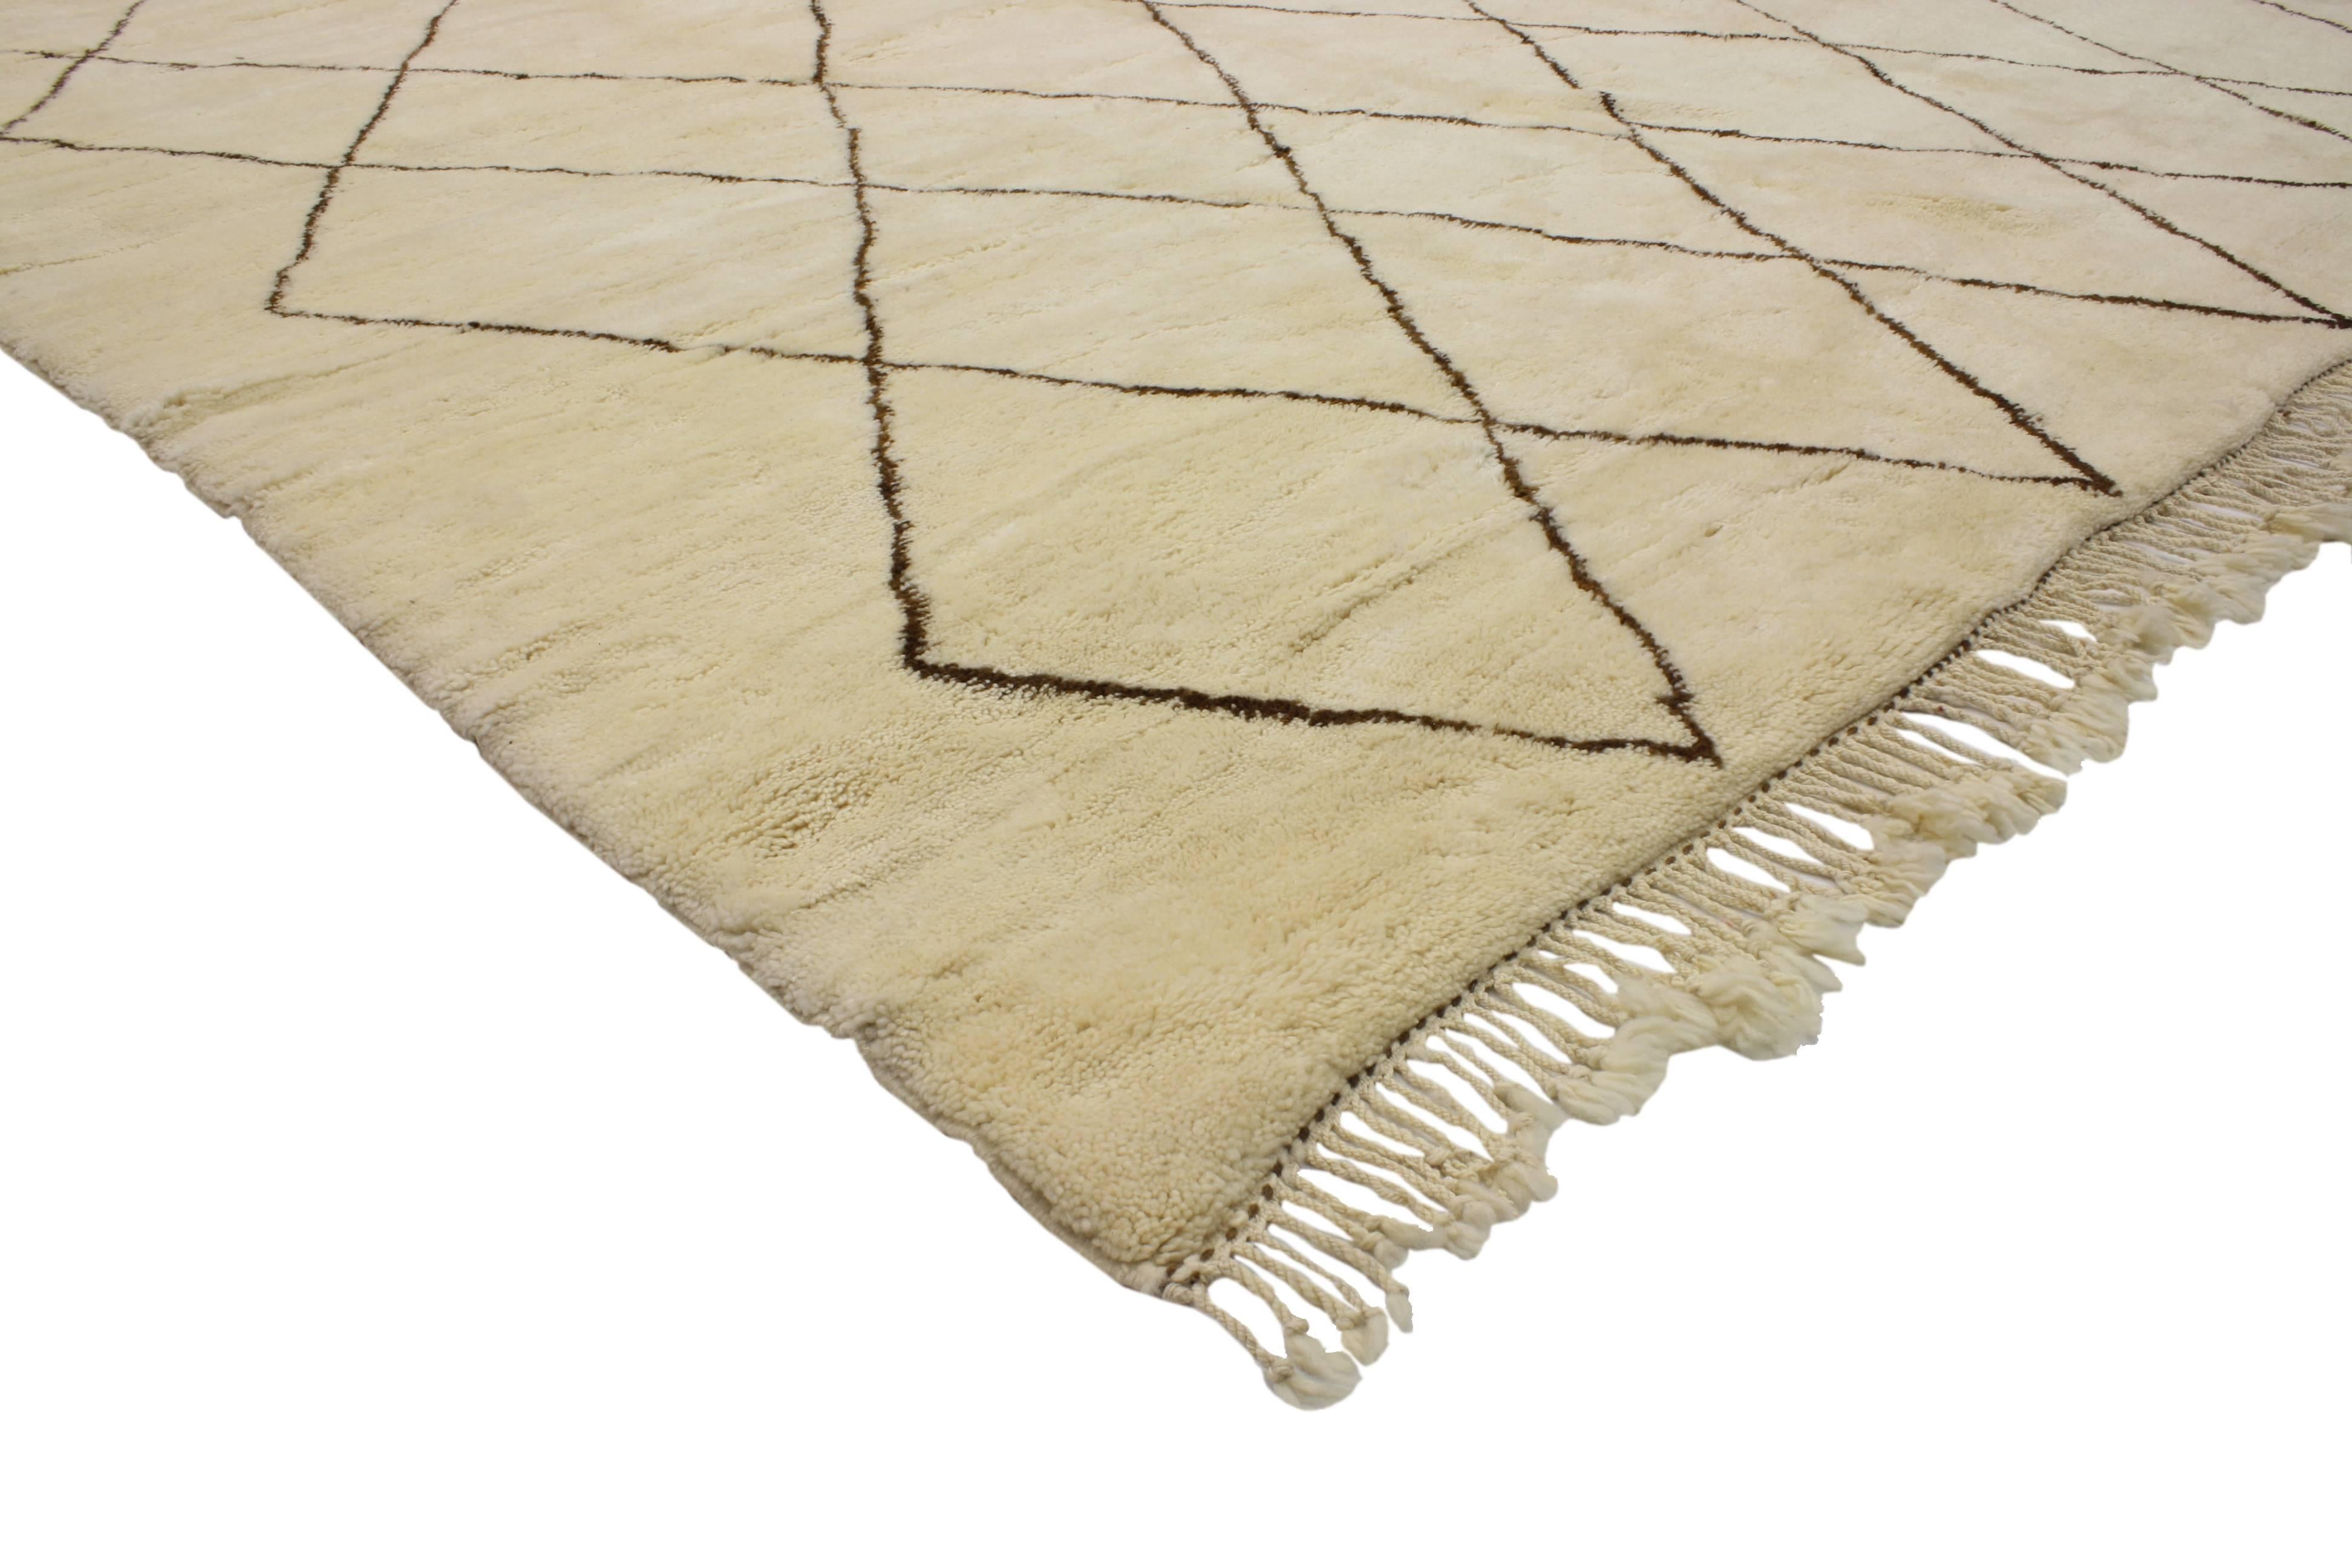 This Mid-Century Modern style Moroccan rug with minimalist design combines the nomadic Berber tribe history with today’s modern interiors. Impeccably woven from hand-knotted sheep wool, this thick and plush piled rug is always chic, yet